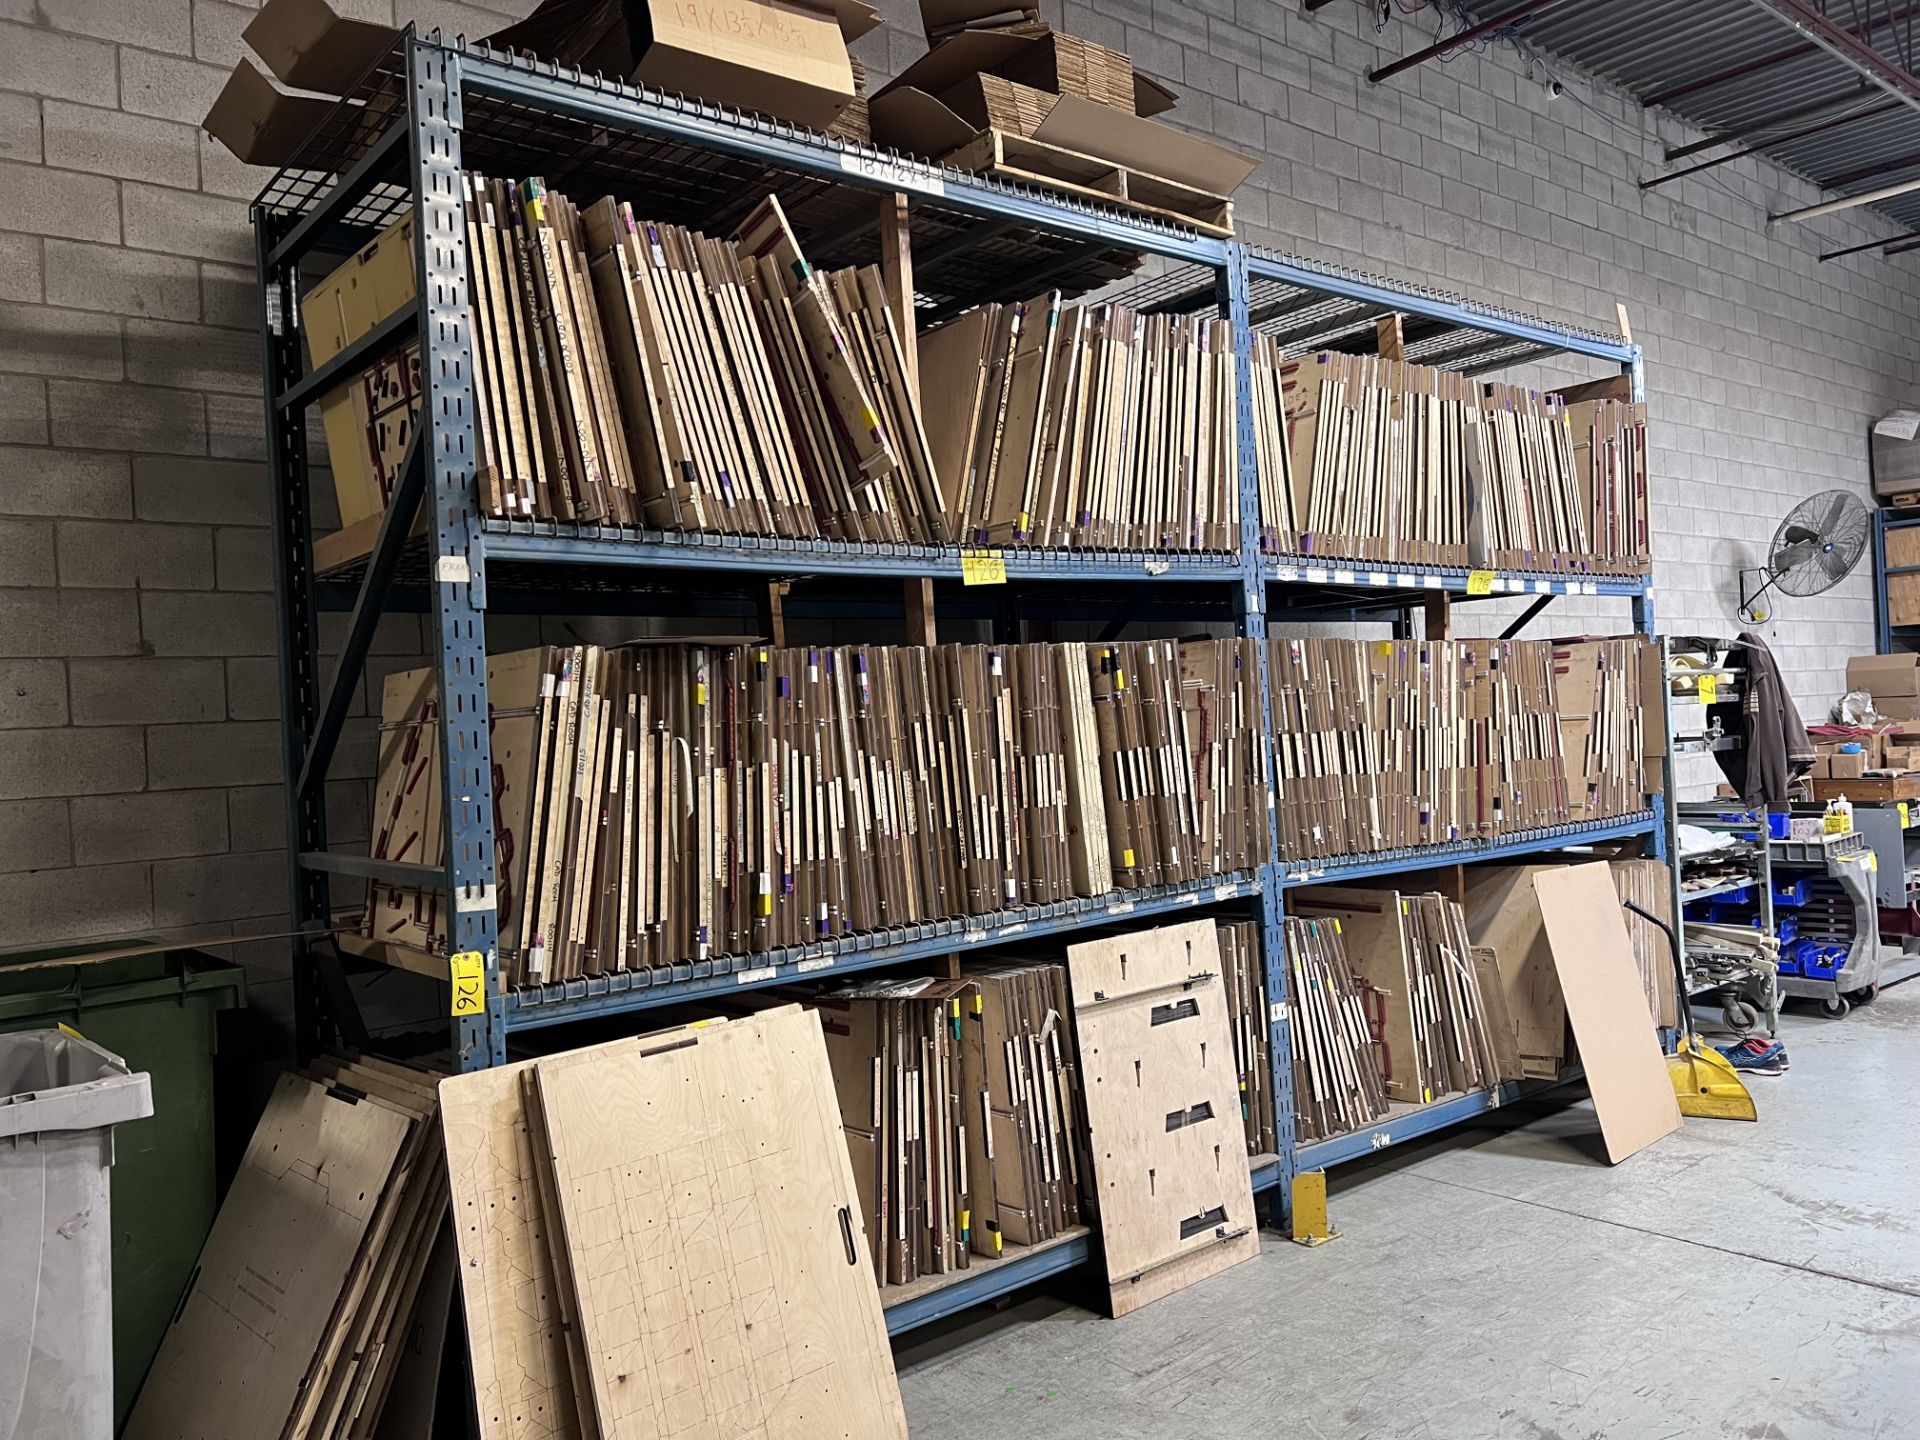 LOT OF (5) SECTIONS OF PALLET RACKING W/ (4) SHELVES AND MESH SHELVING, APPROX. 10'/8'W X 42"D X